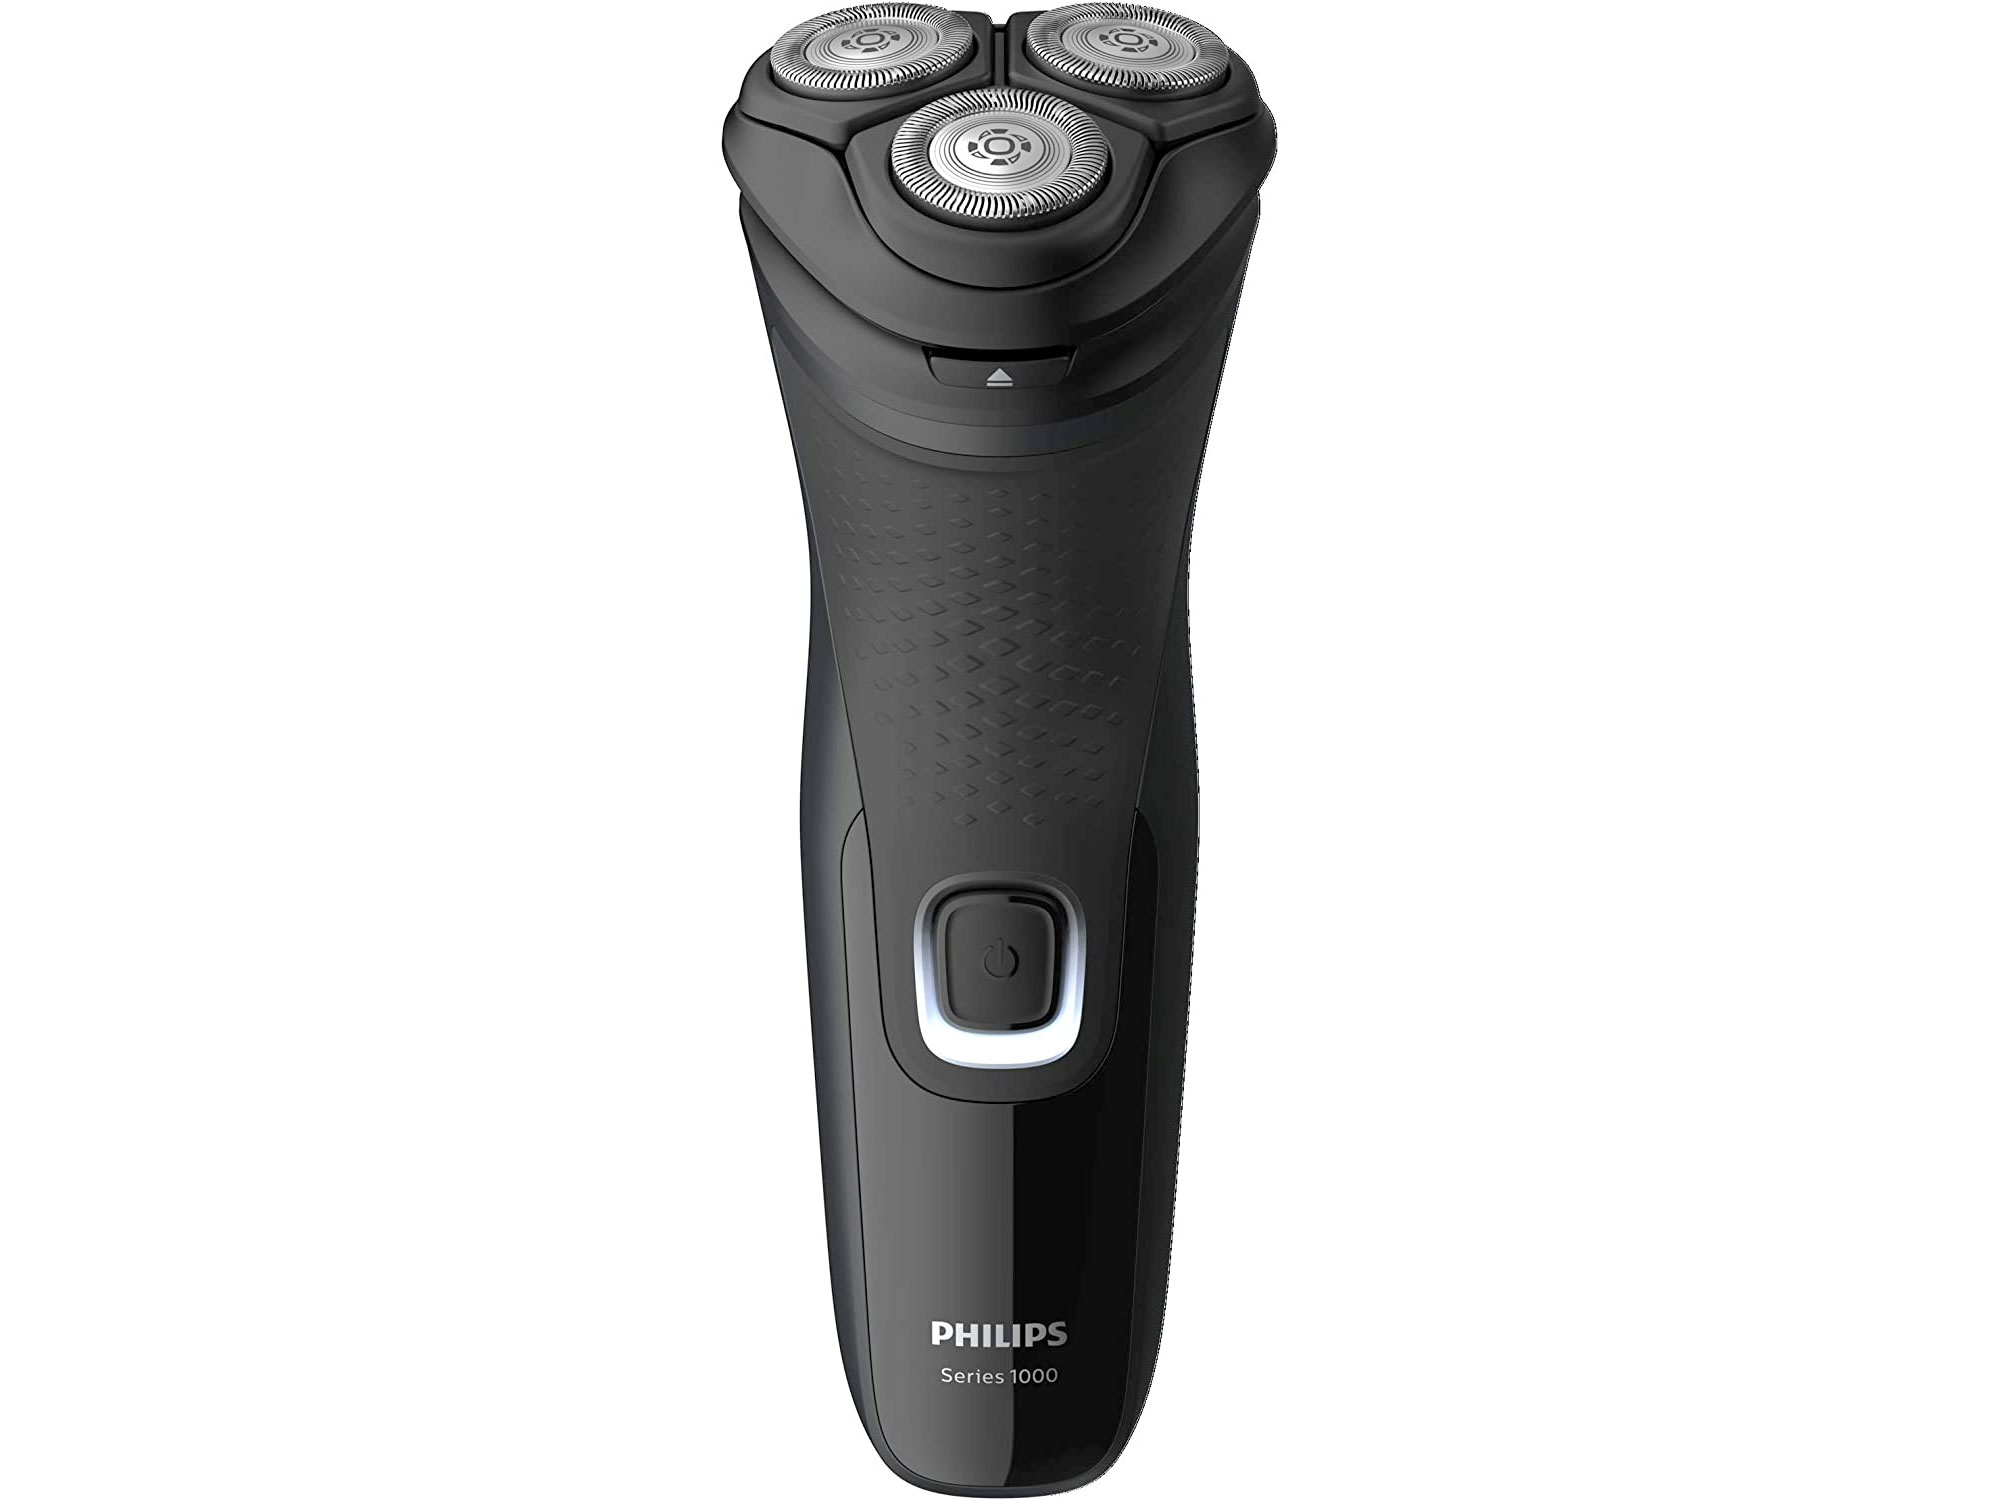 Amazon：Philips Shaver Series 1000 with Pop-Up Trimmer只賣$39.95